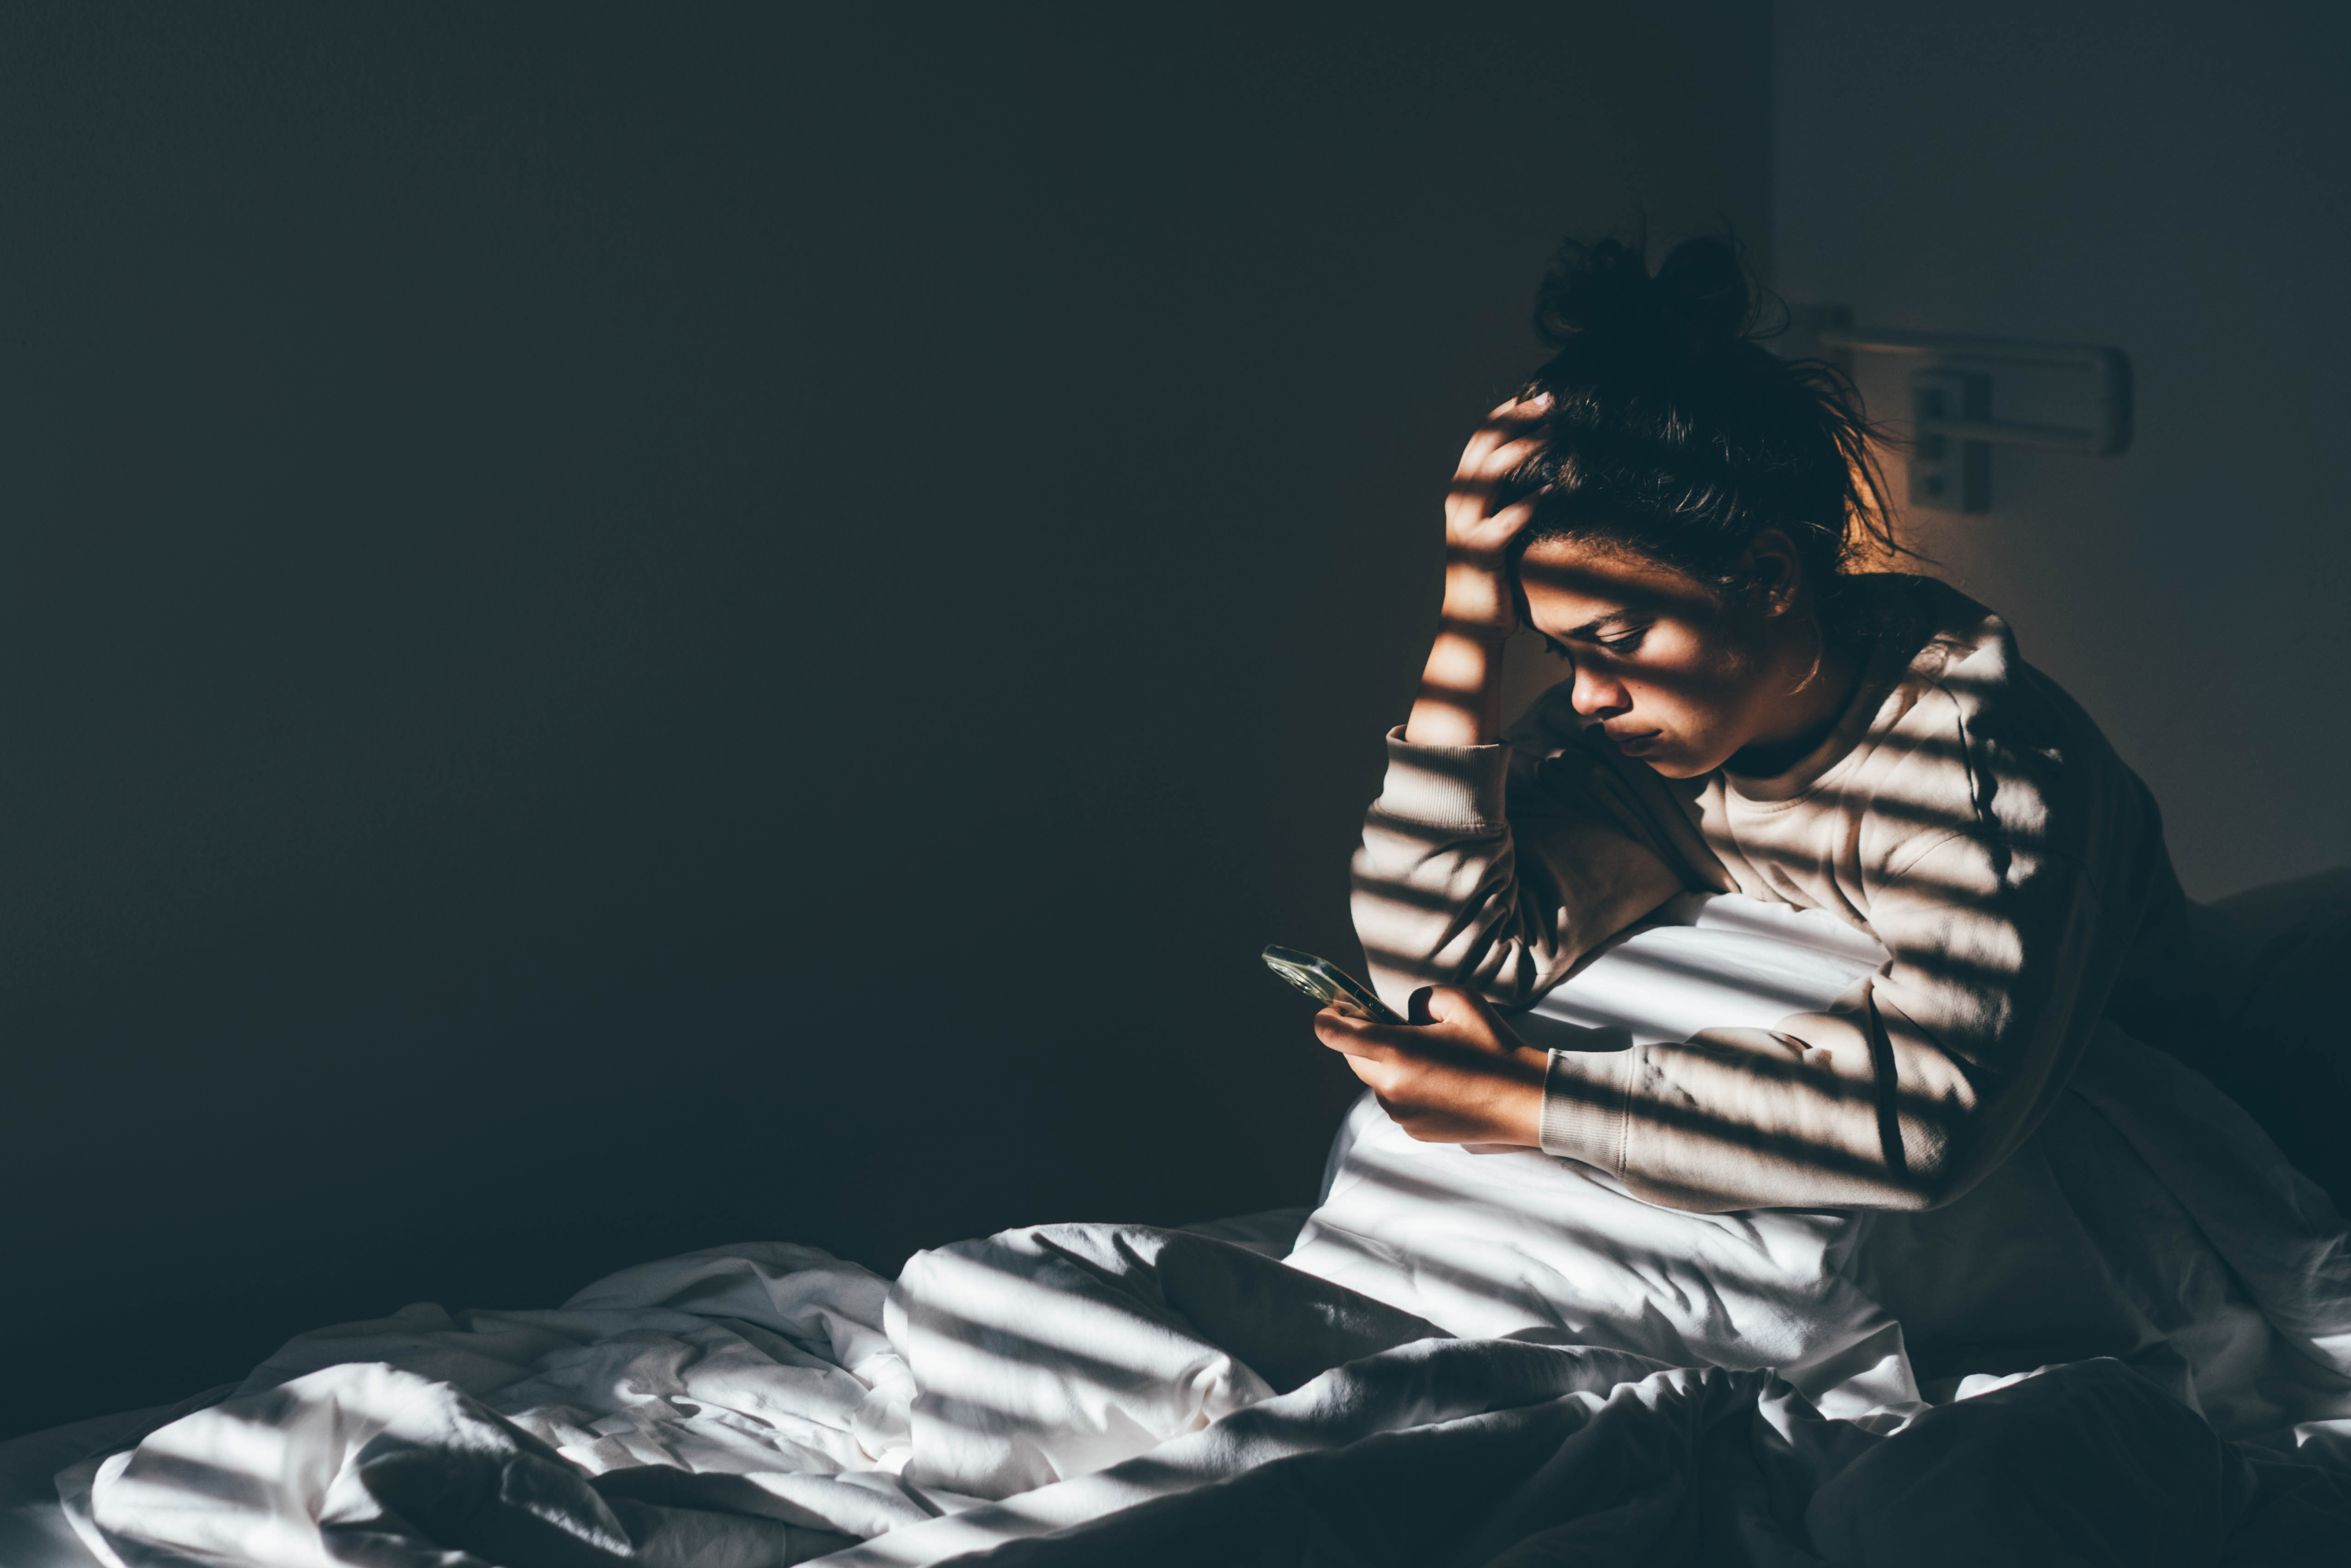 worried women sitting up in bed looking up symptoms on her phone